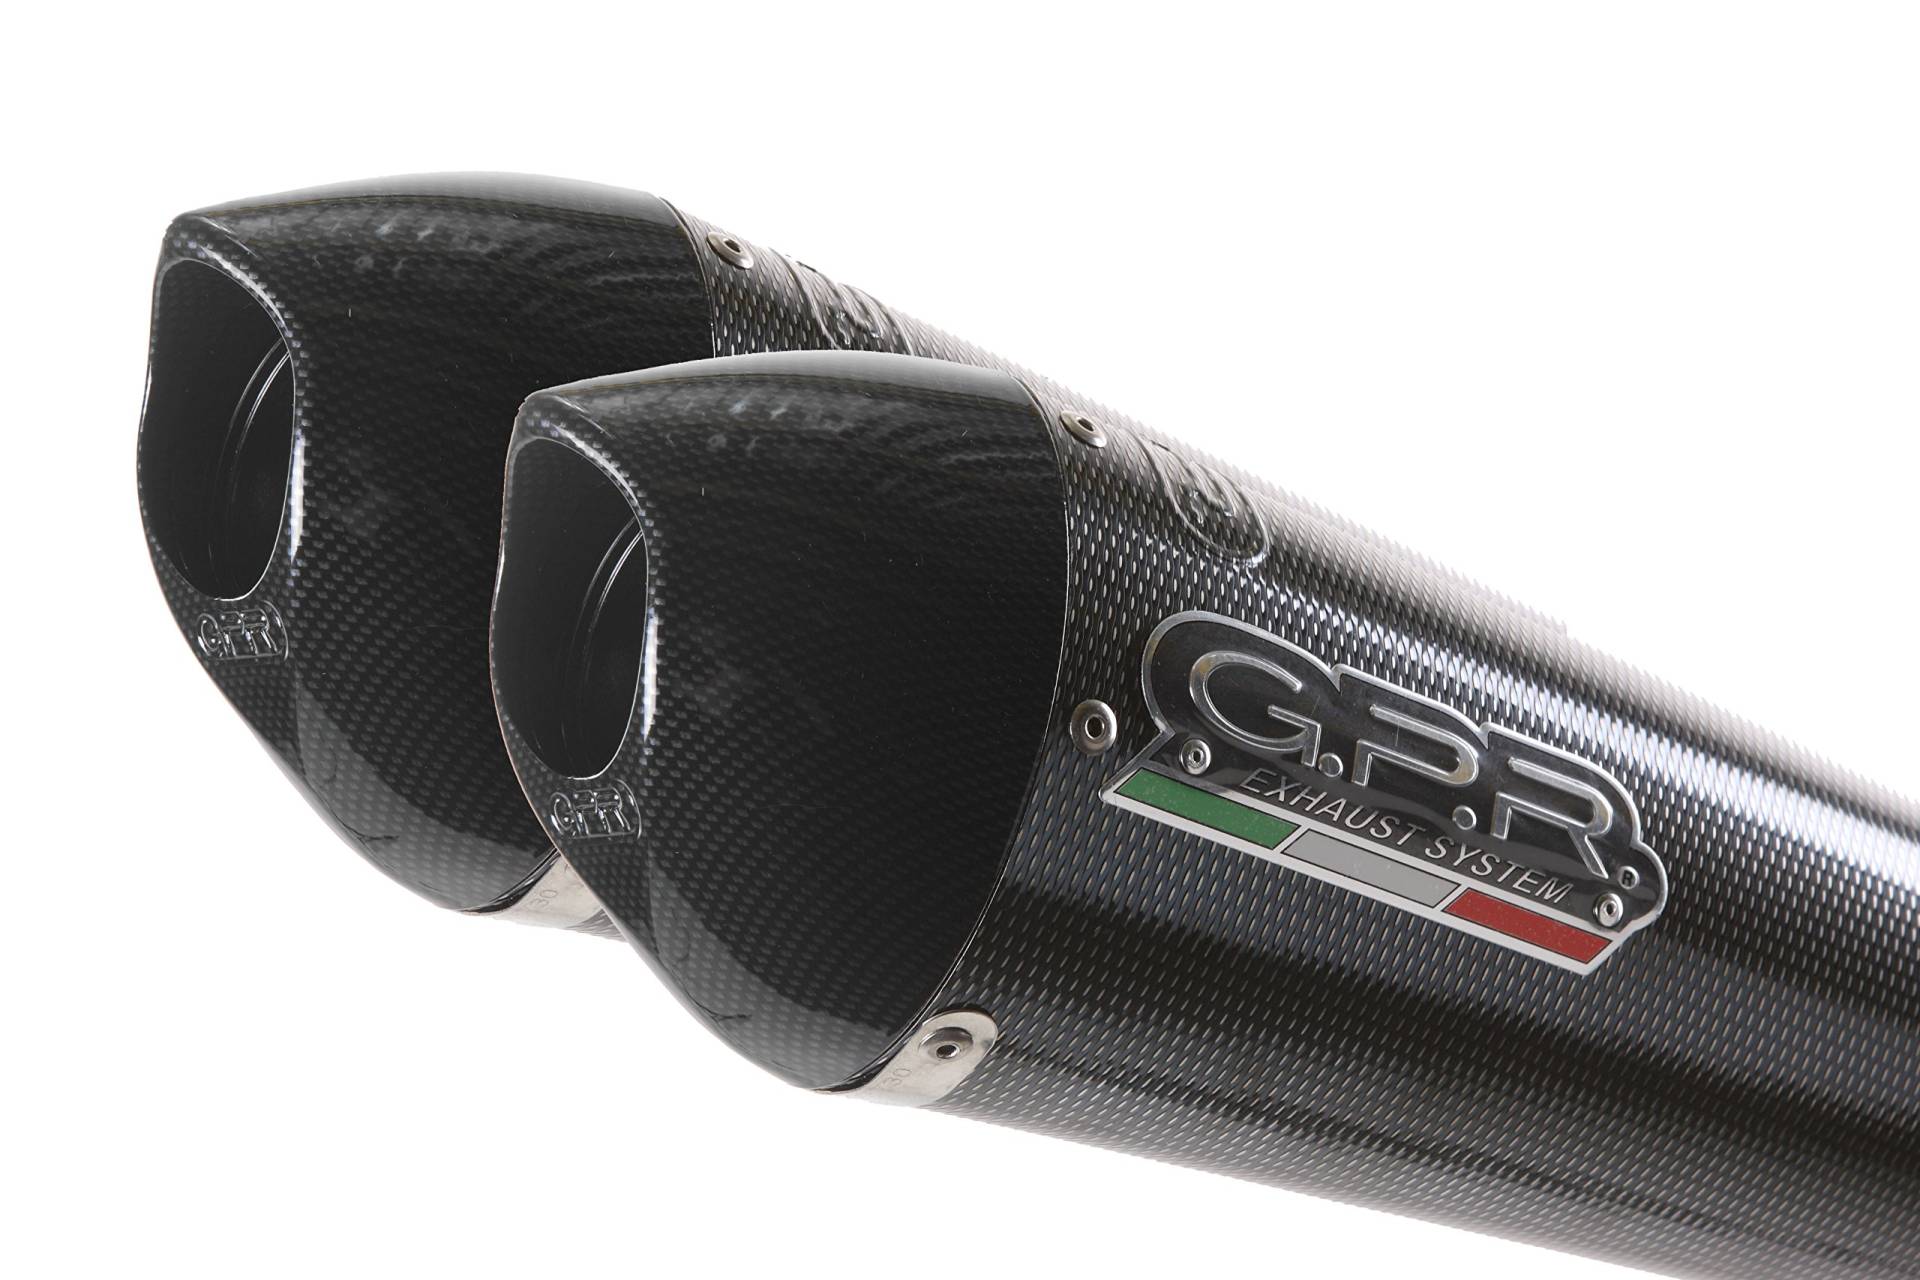 GPR Auspuff Endkappe – Ducati Monster 696 2008/14 dual HOMOLOGATED Slip Exhaust System with CATALYSTS by GPR Exhaust Systems der EVO Poppy Line von GPR EXHAUST SYSTEM